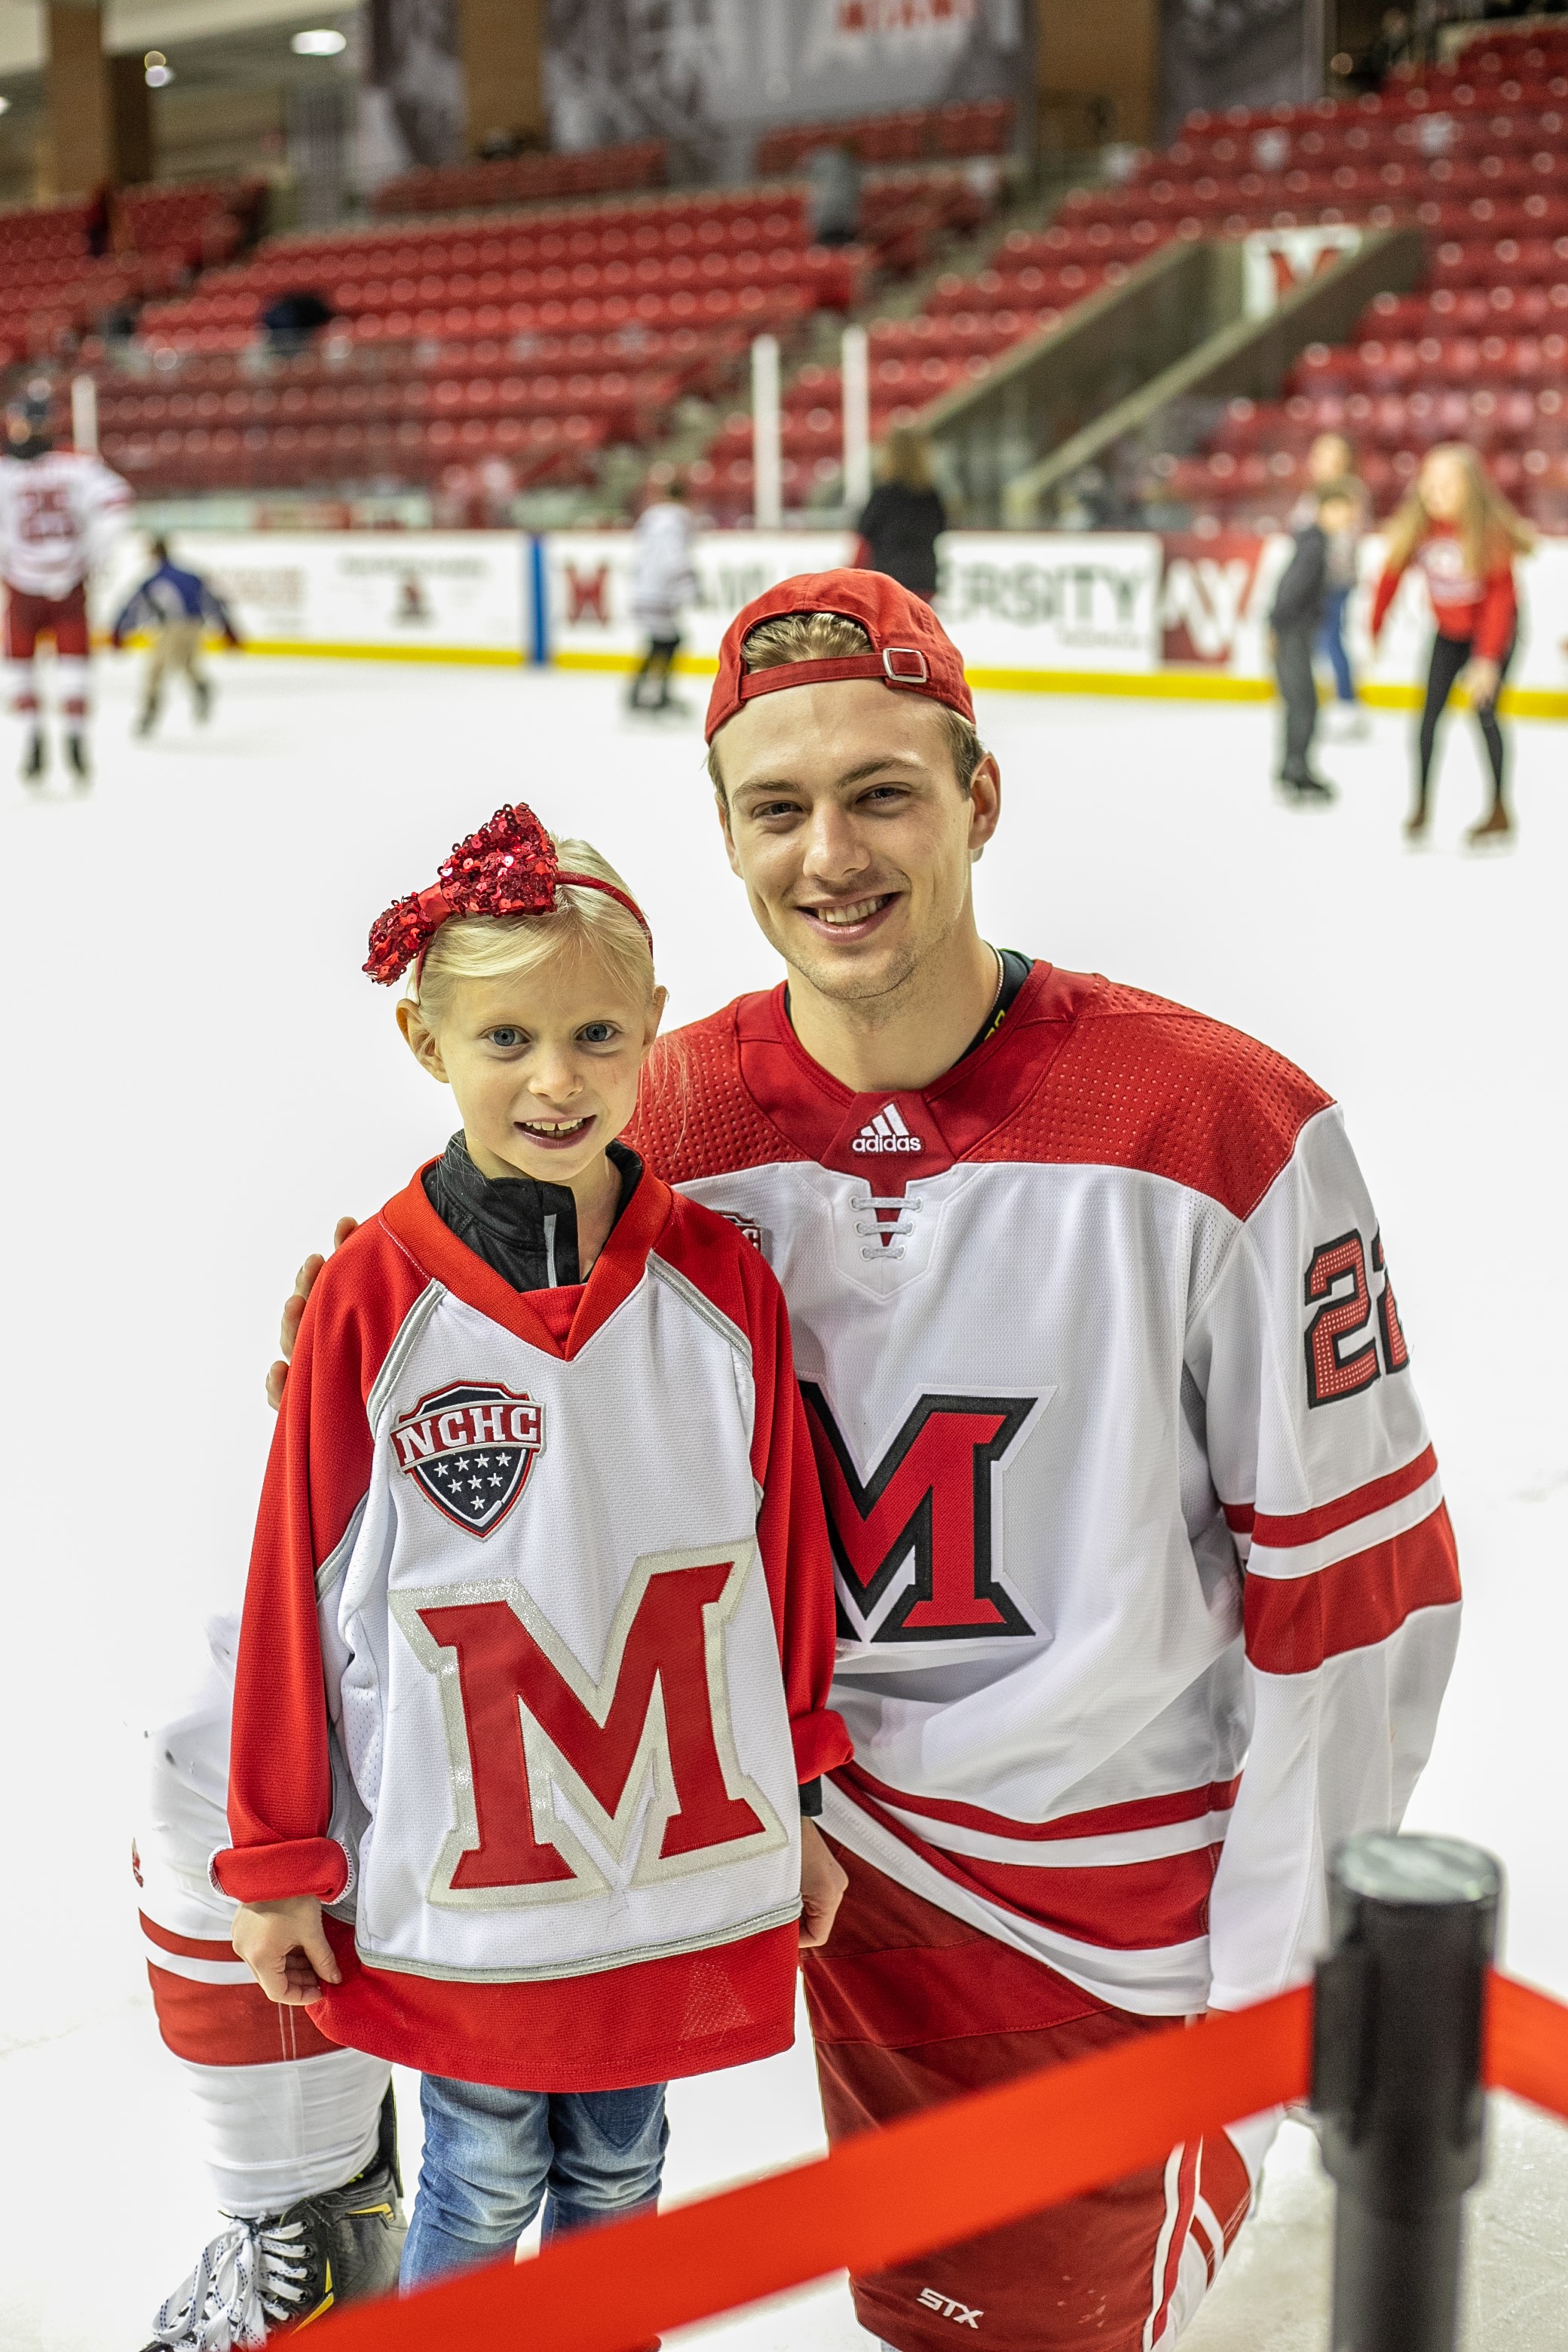 Carter poses with a young girl on the ice rink